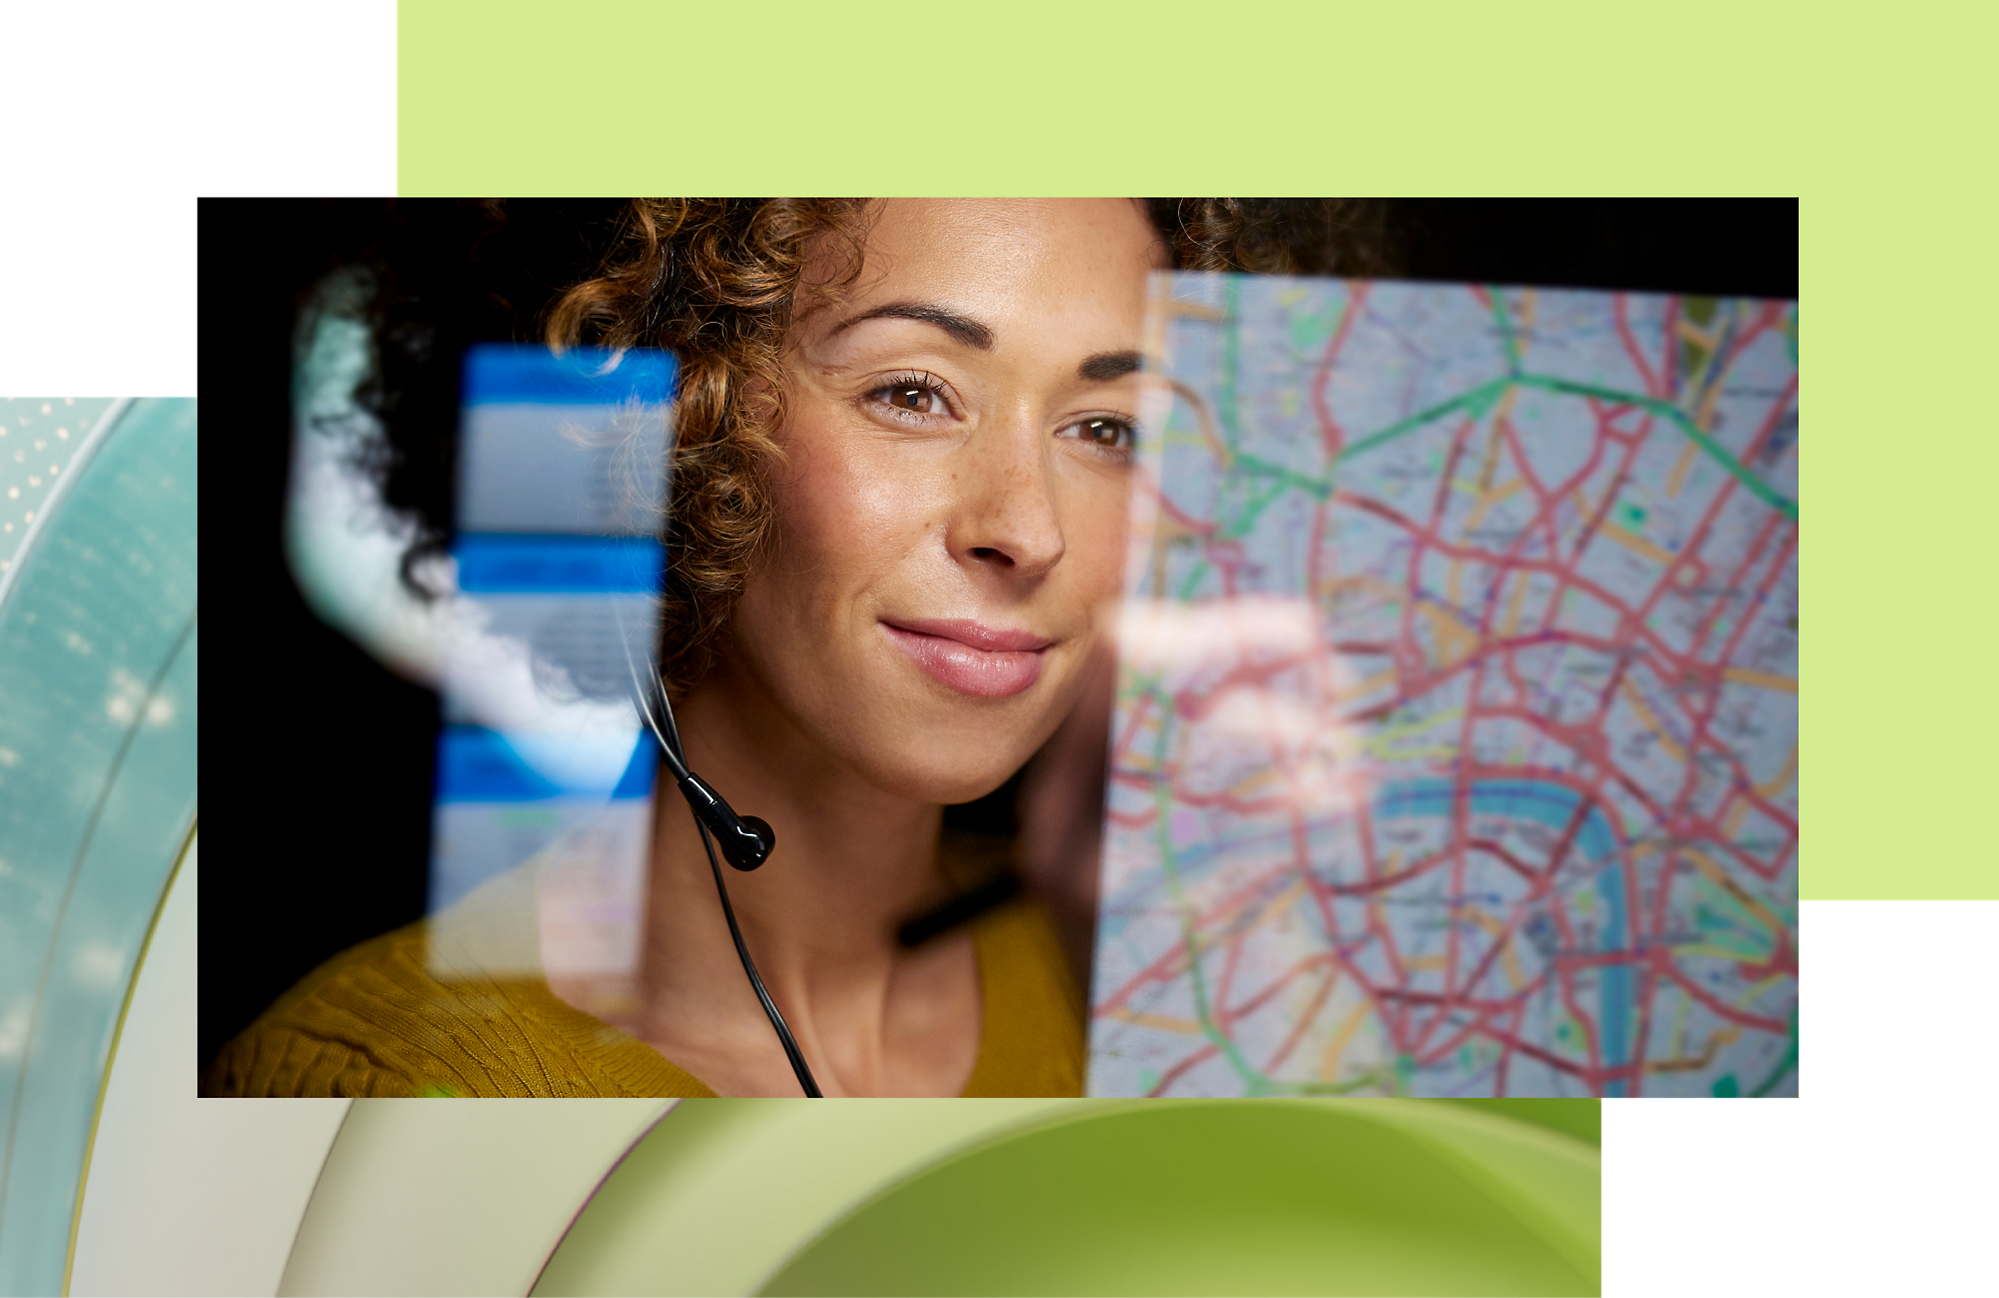 Customer service representative wearing a headset, smiling while looking at a map on a digital screen